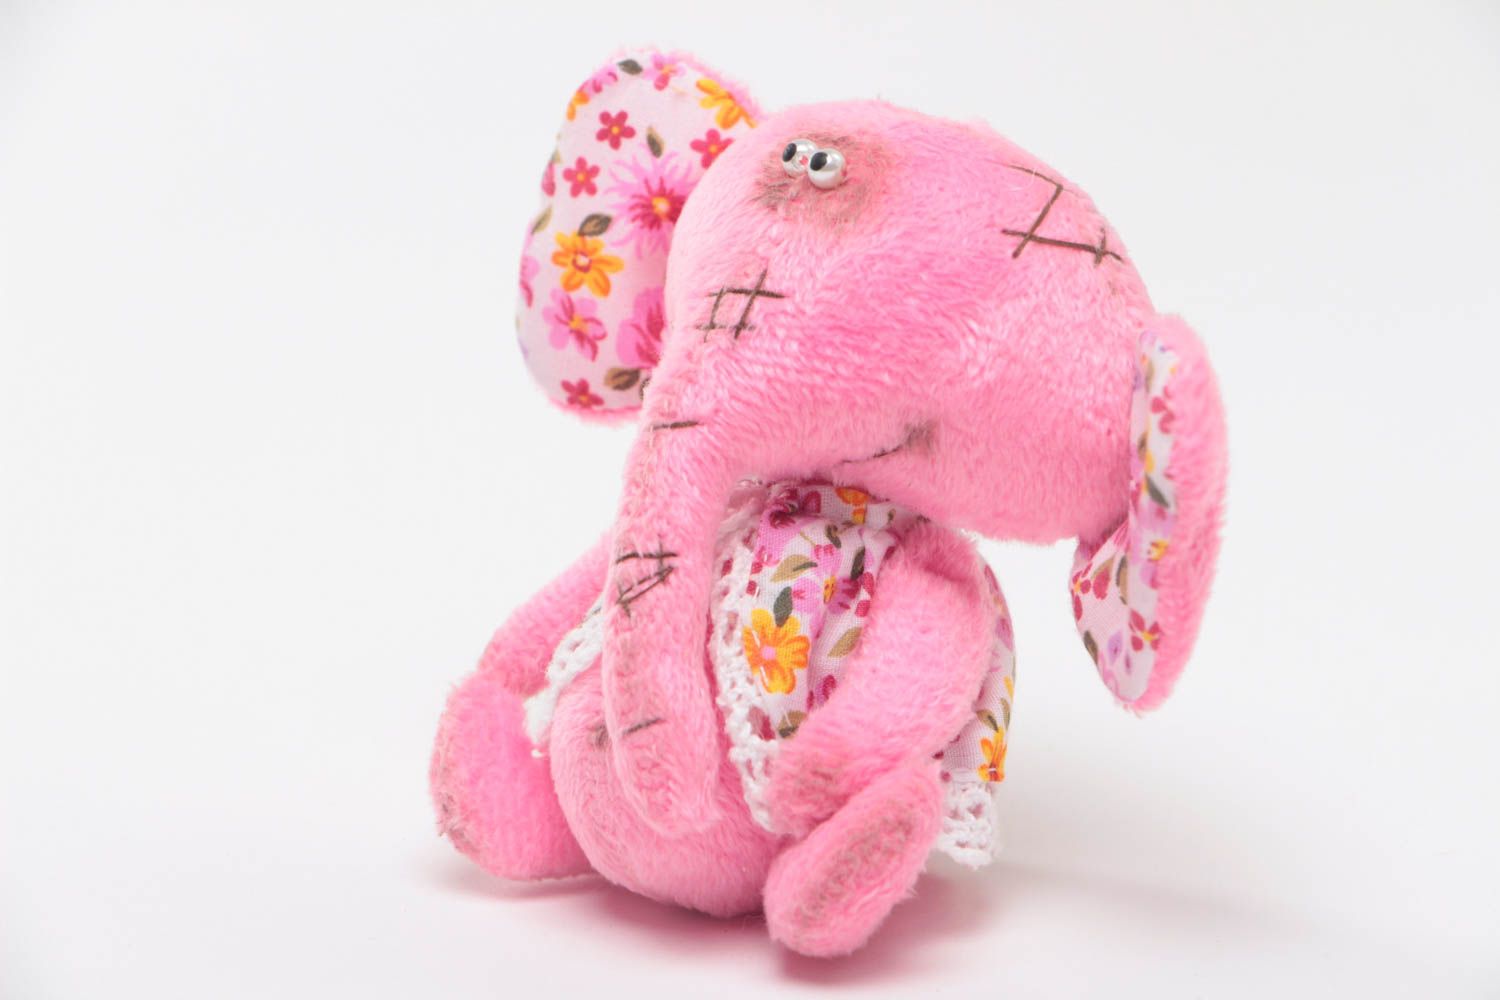 Handmade small vintage soft toy sewn of plush pink elephant with floral ears photo 2